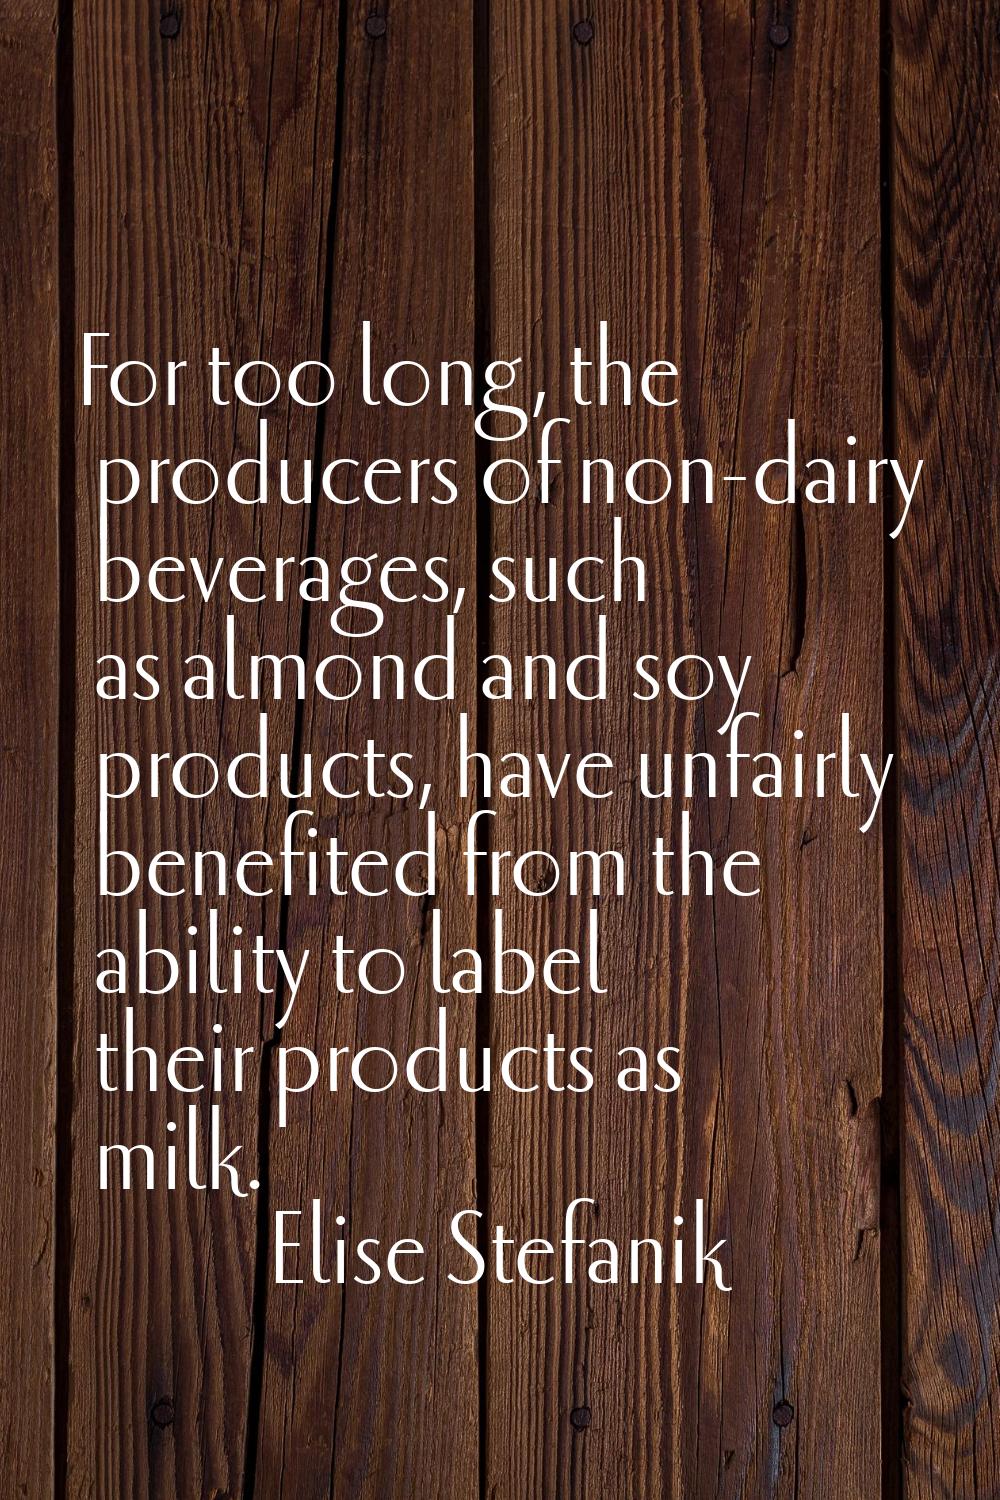 For too long, the producers of non-dairy beverages, such as almond and soy products, have unfairly 